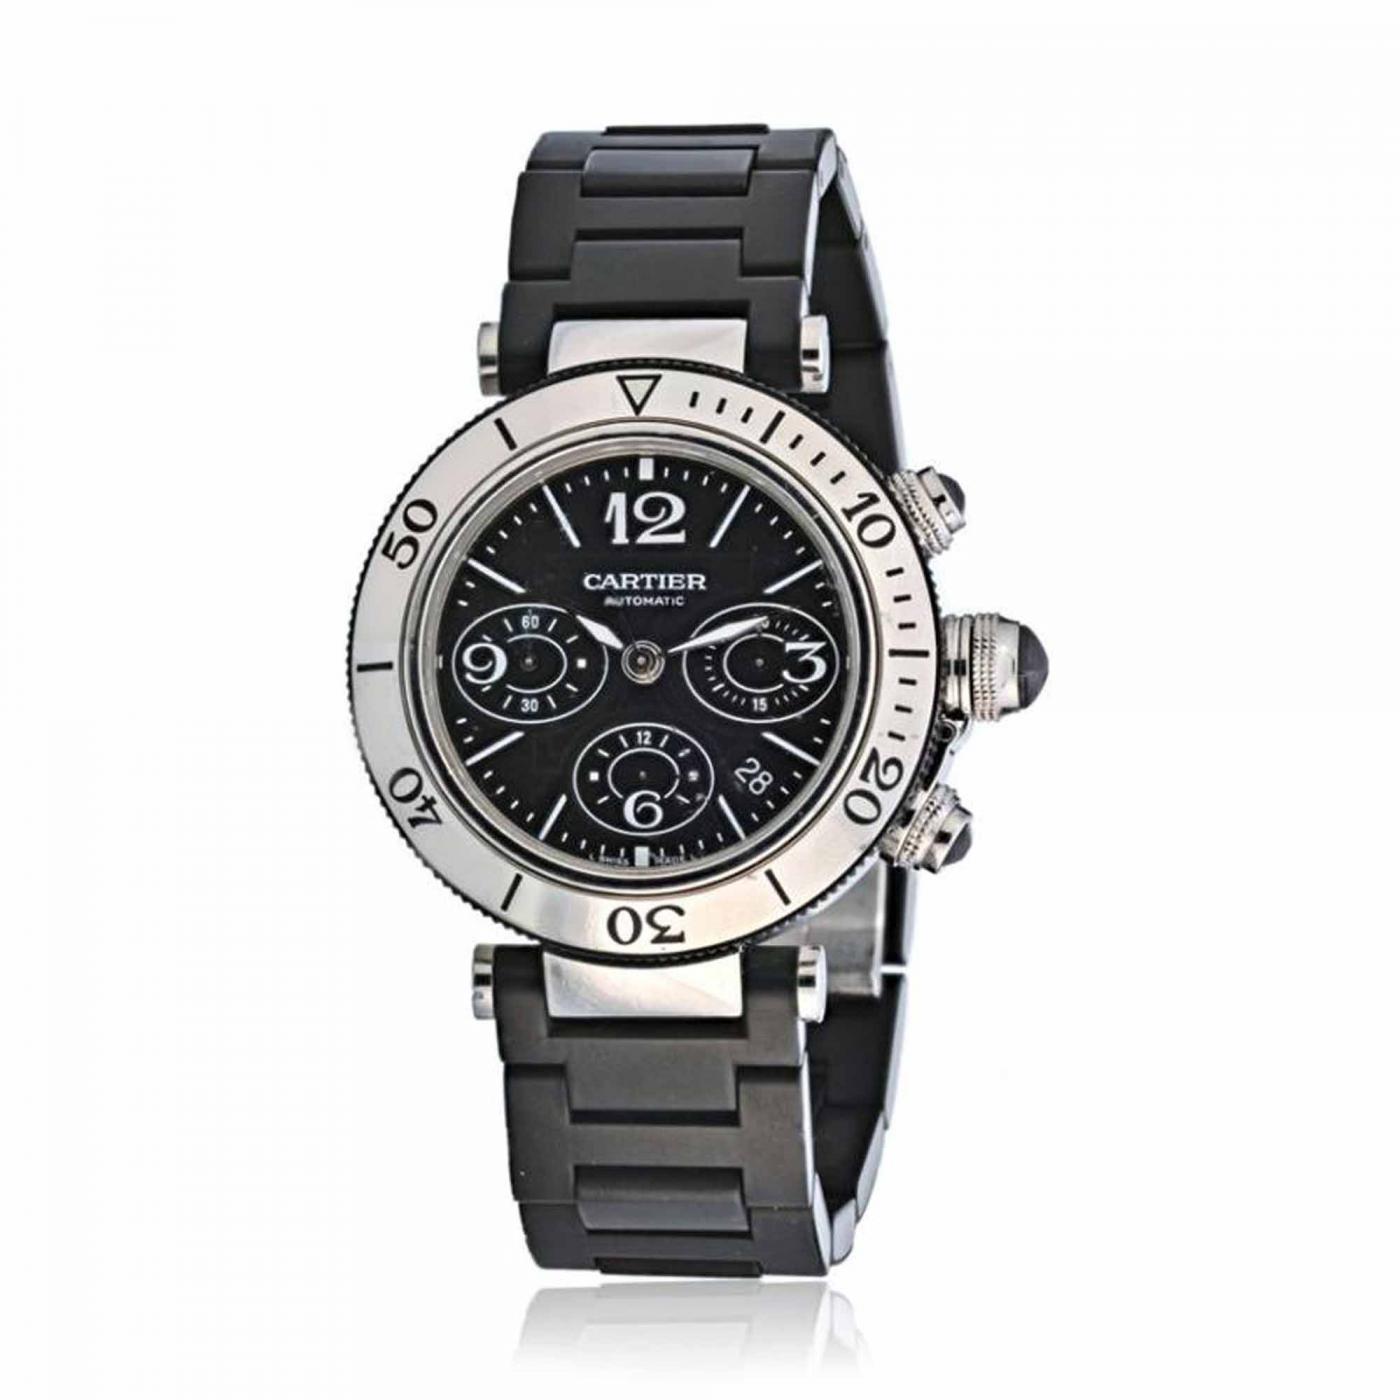 CARTIER PASHA SEATIMER STAINLESS STEEL 